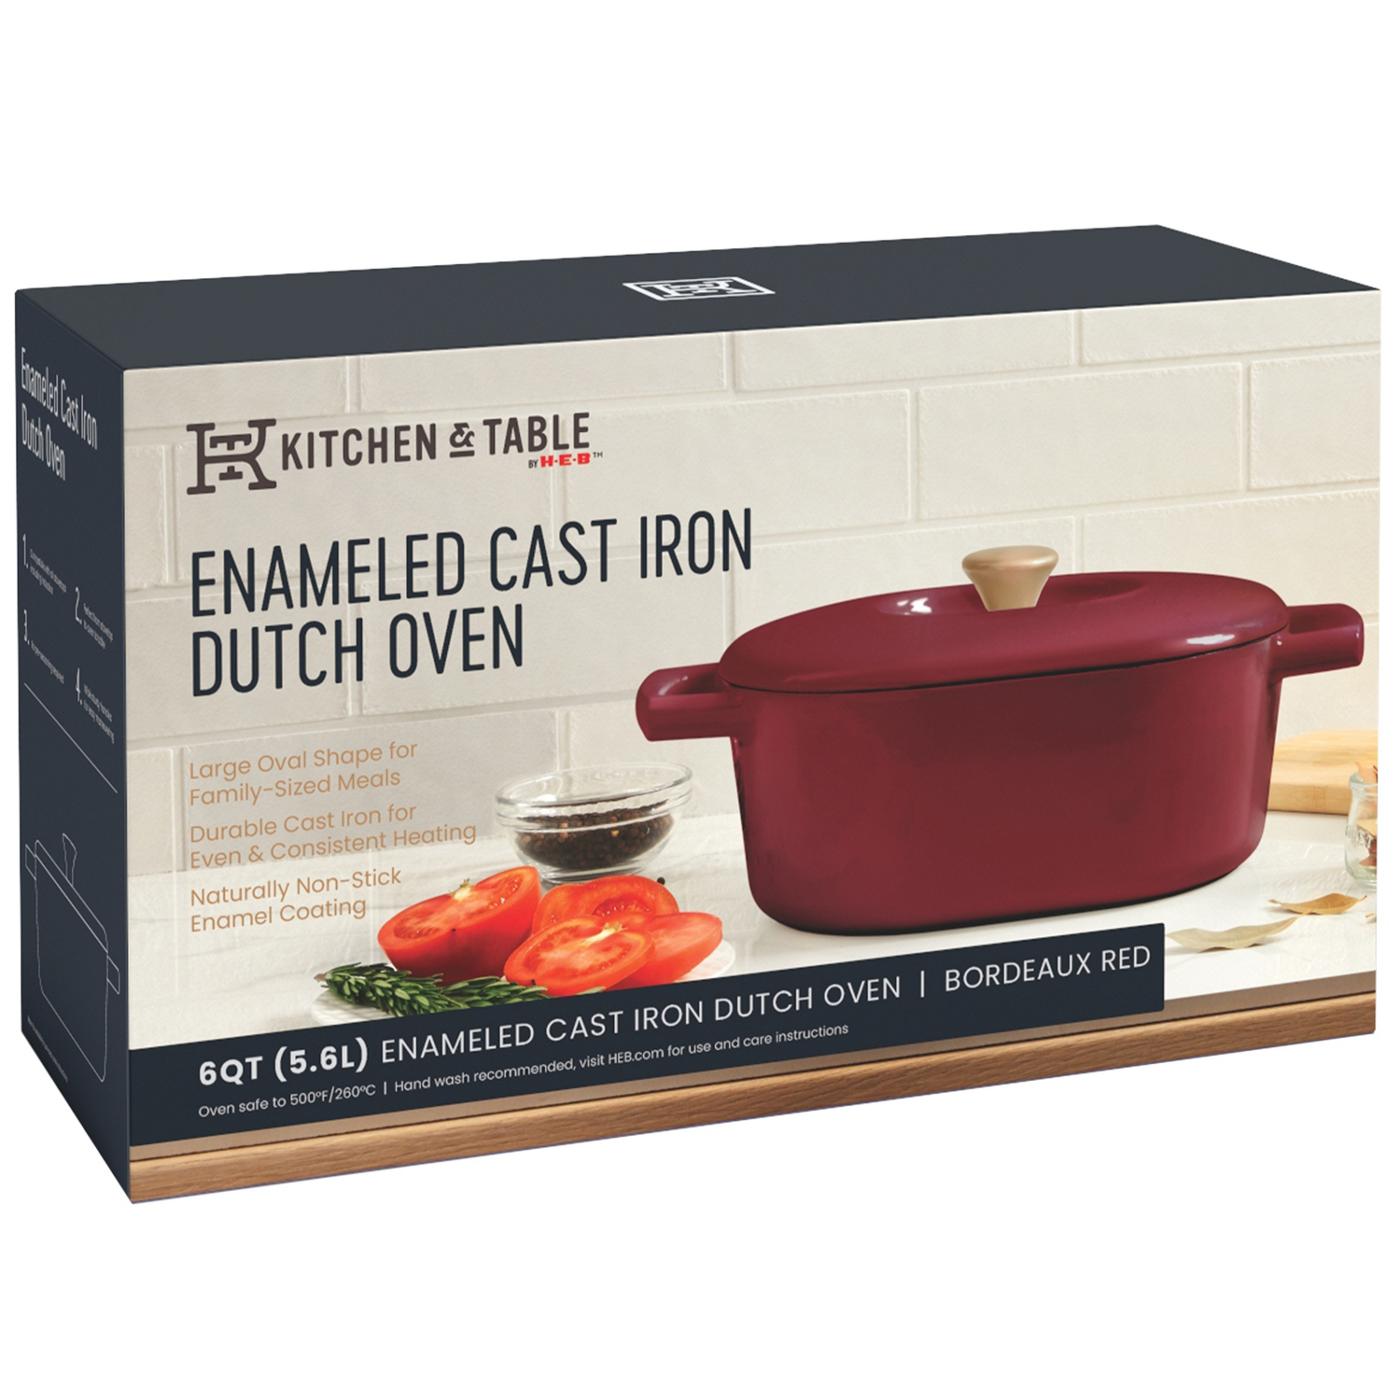 Kitchen & Table by H-E-B Enameled Cast Iron Dutch Oven - Bordeaux Red; image 3 of 6